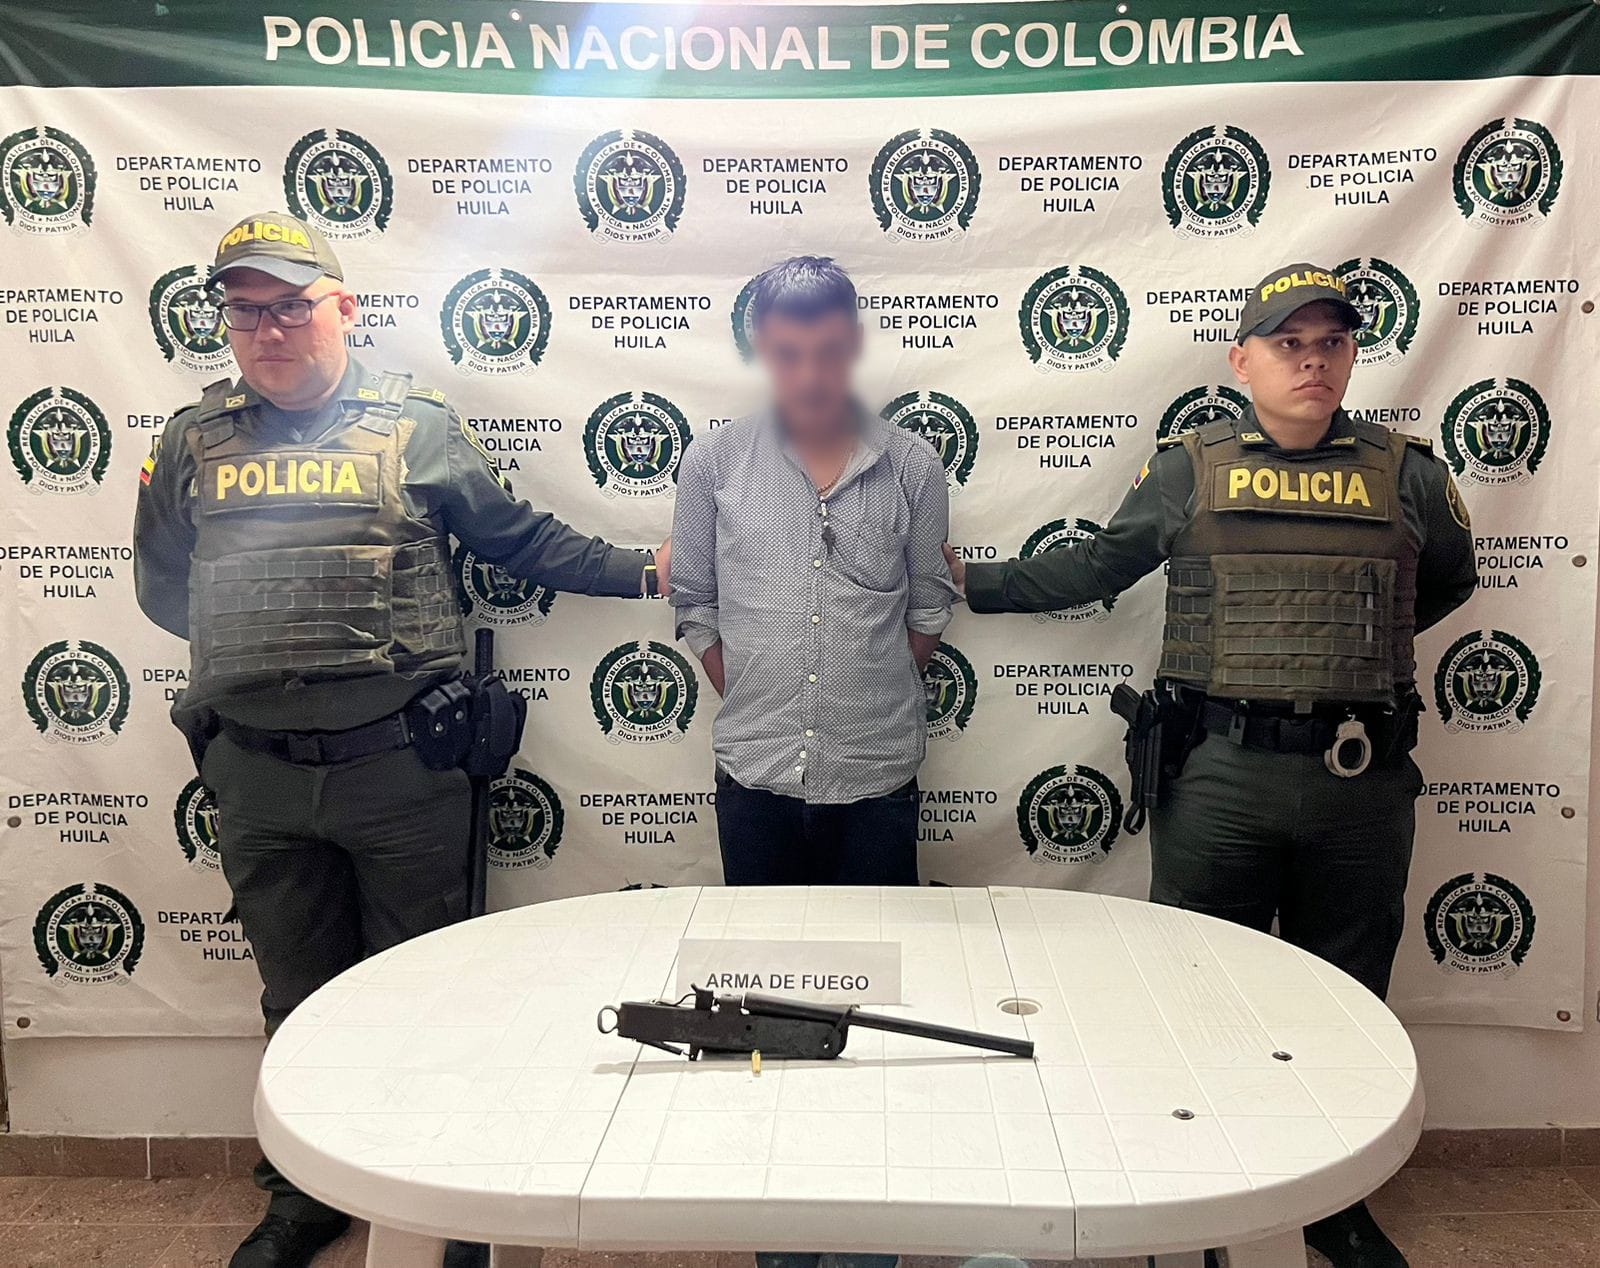 Kidnapped in Colombia, Huila is in possession of a home made weapon modified to be deadly